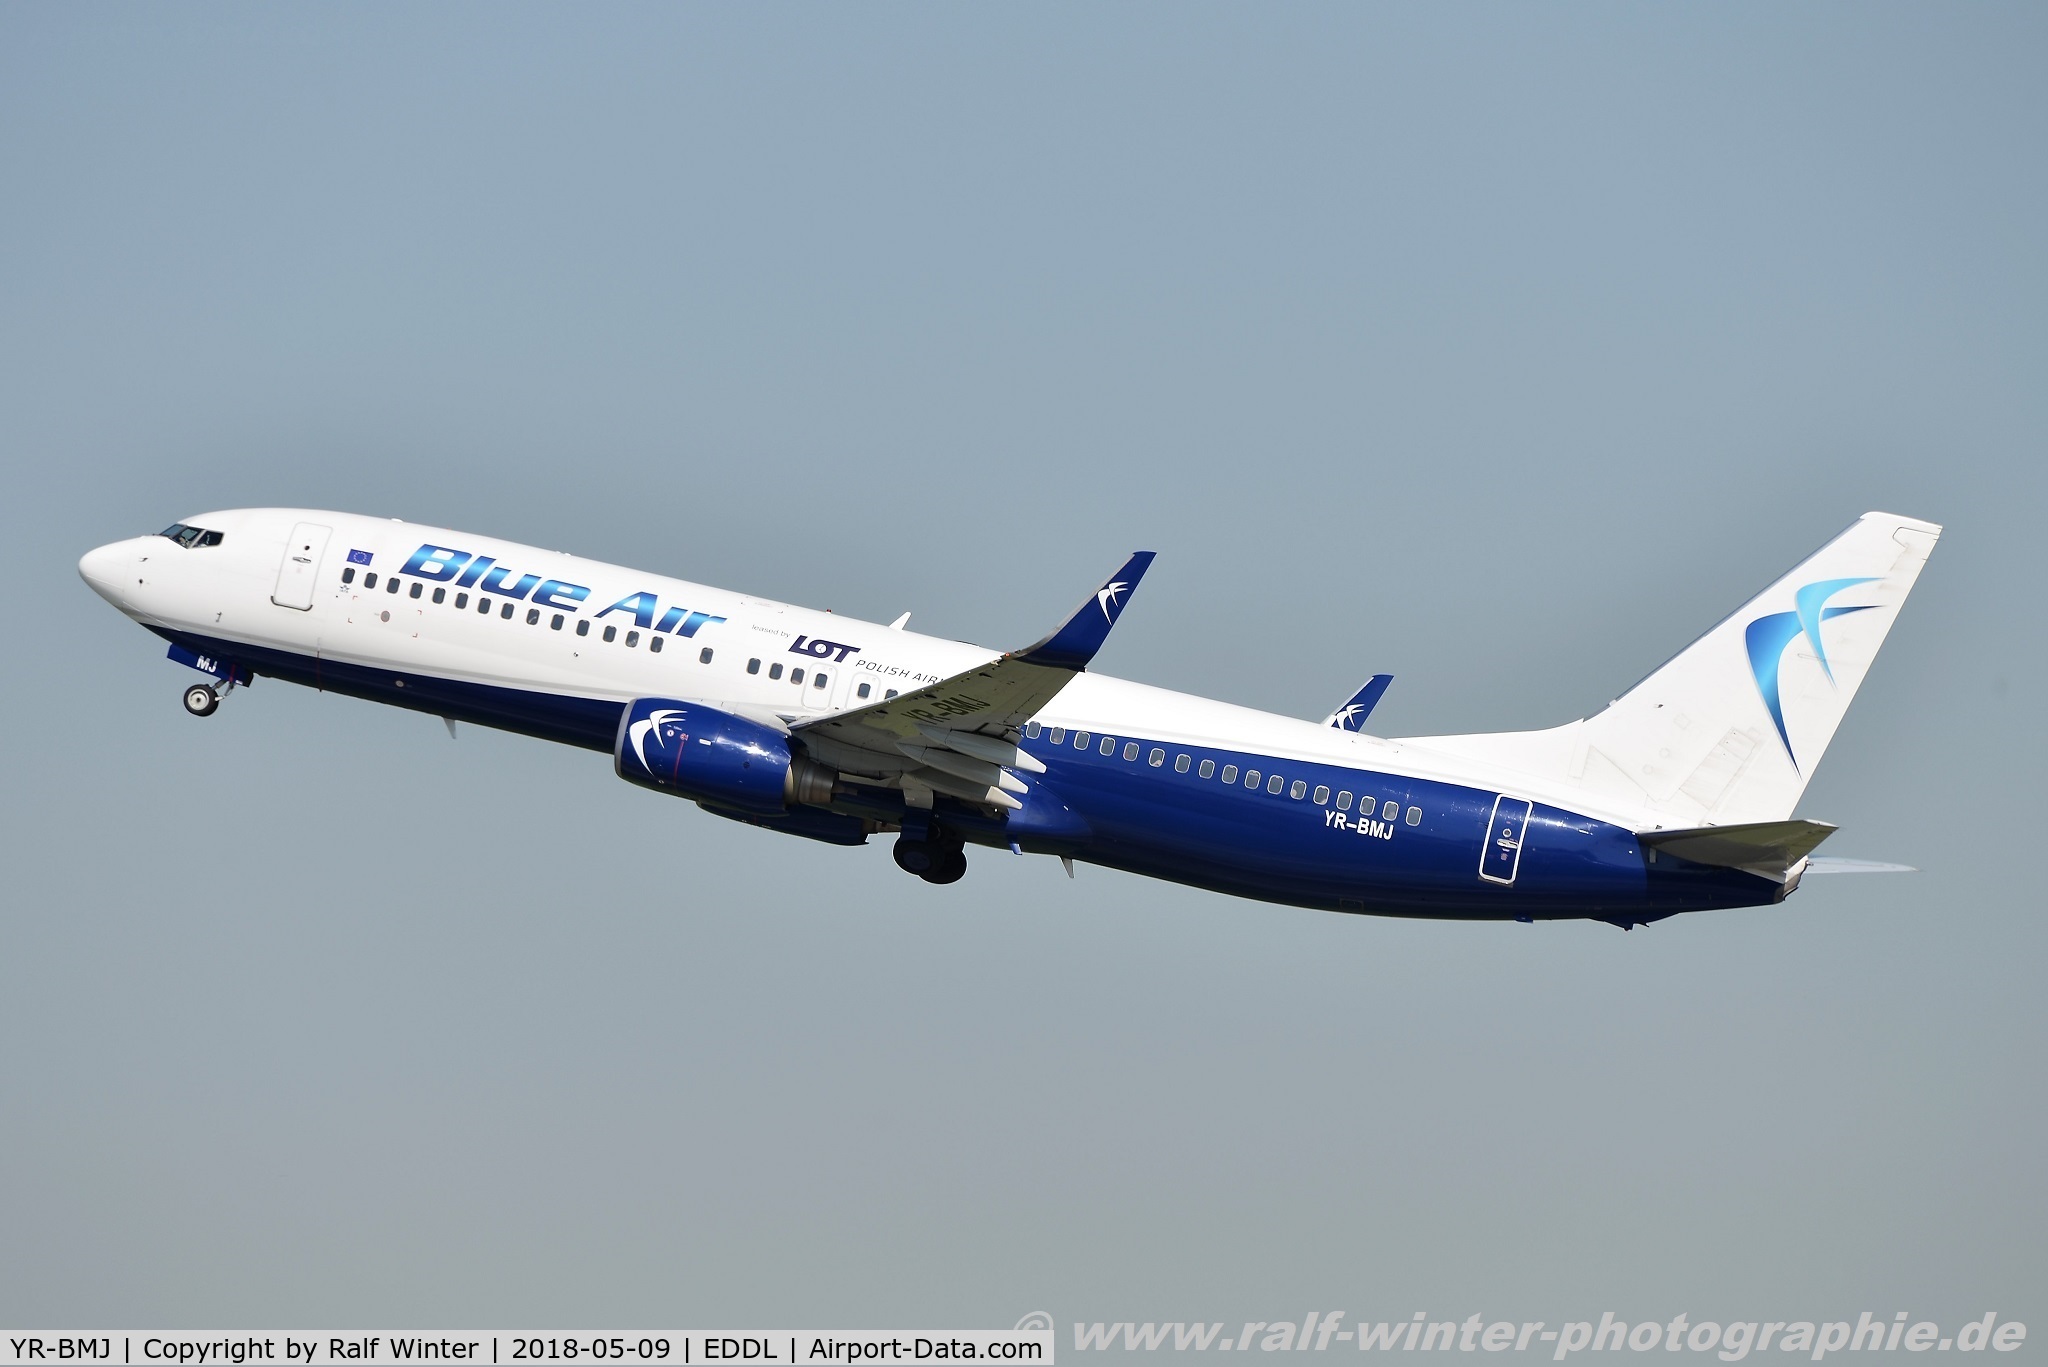 YR-BMJ, 2010 Boeing 737-82R C/N 40696, Boeing 737-82R(W) - 0B BMS Blue Air 'leased by LOT Polish Airlines' - 40696 - YR-BMJ - 09.05.2018 - DUS